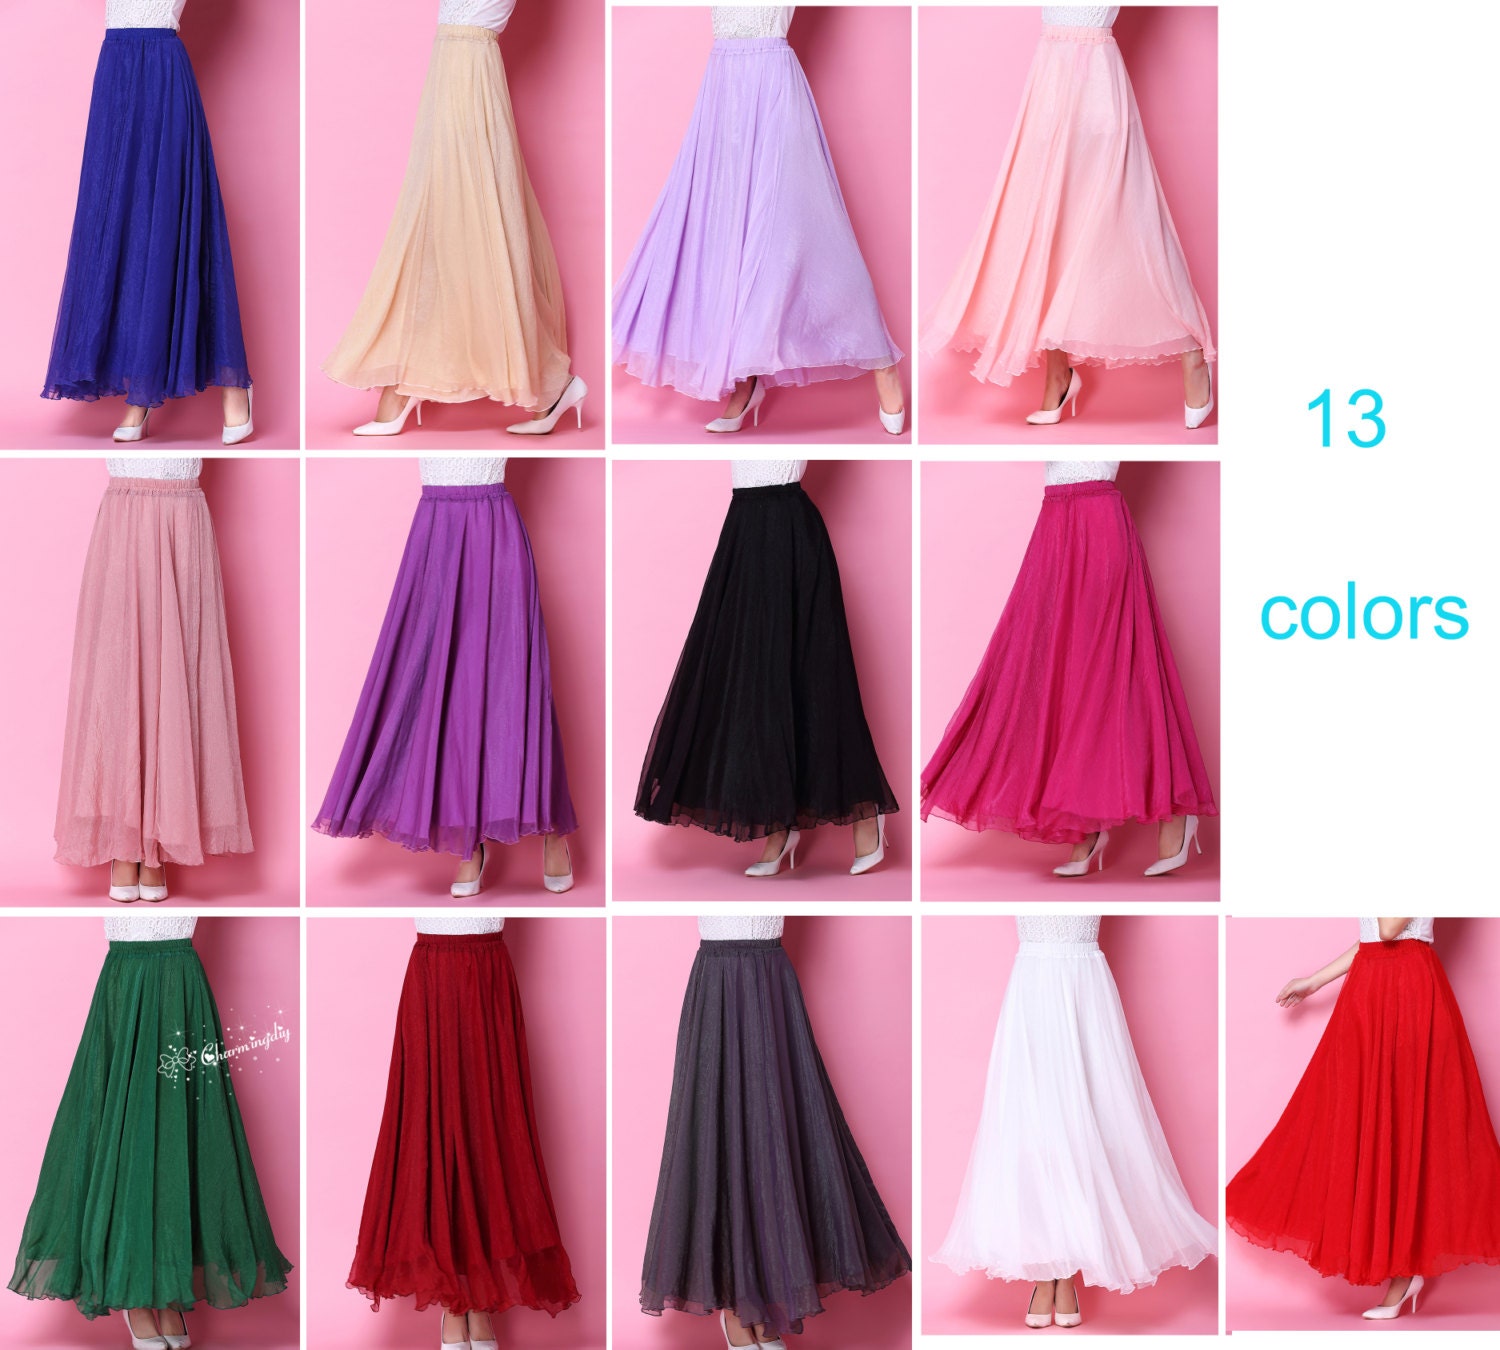 110 Colors Chiffon Emerald Green Long Party Skirt Evening - Etsy